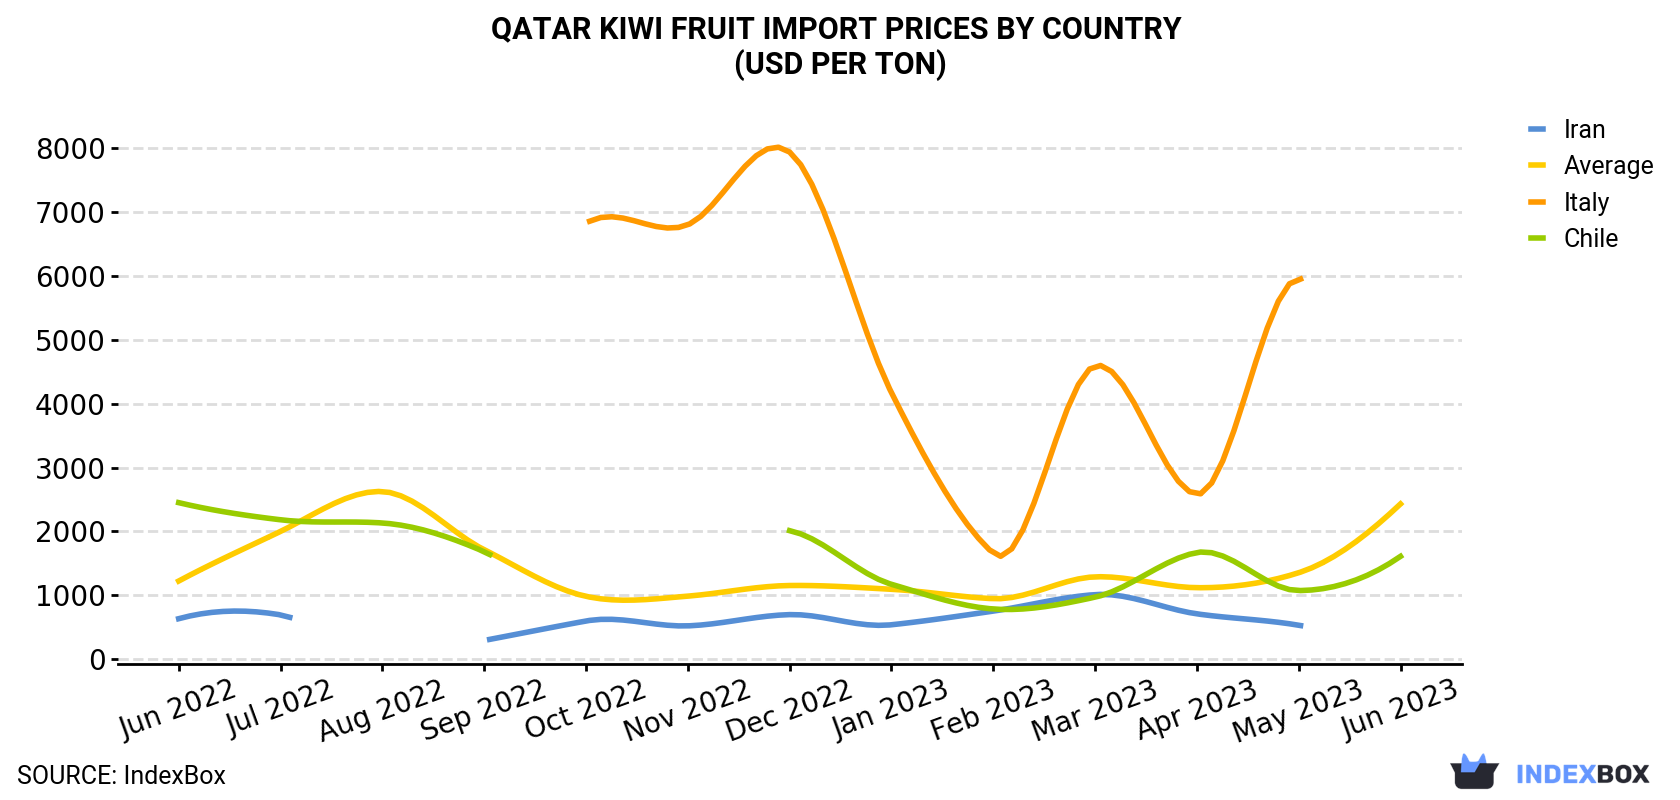 Qatar Kiwi Fruit Import Prices By Country (USD Per Ton)